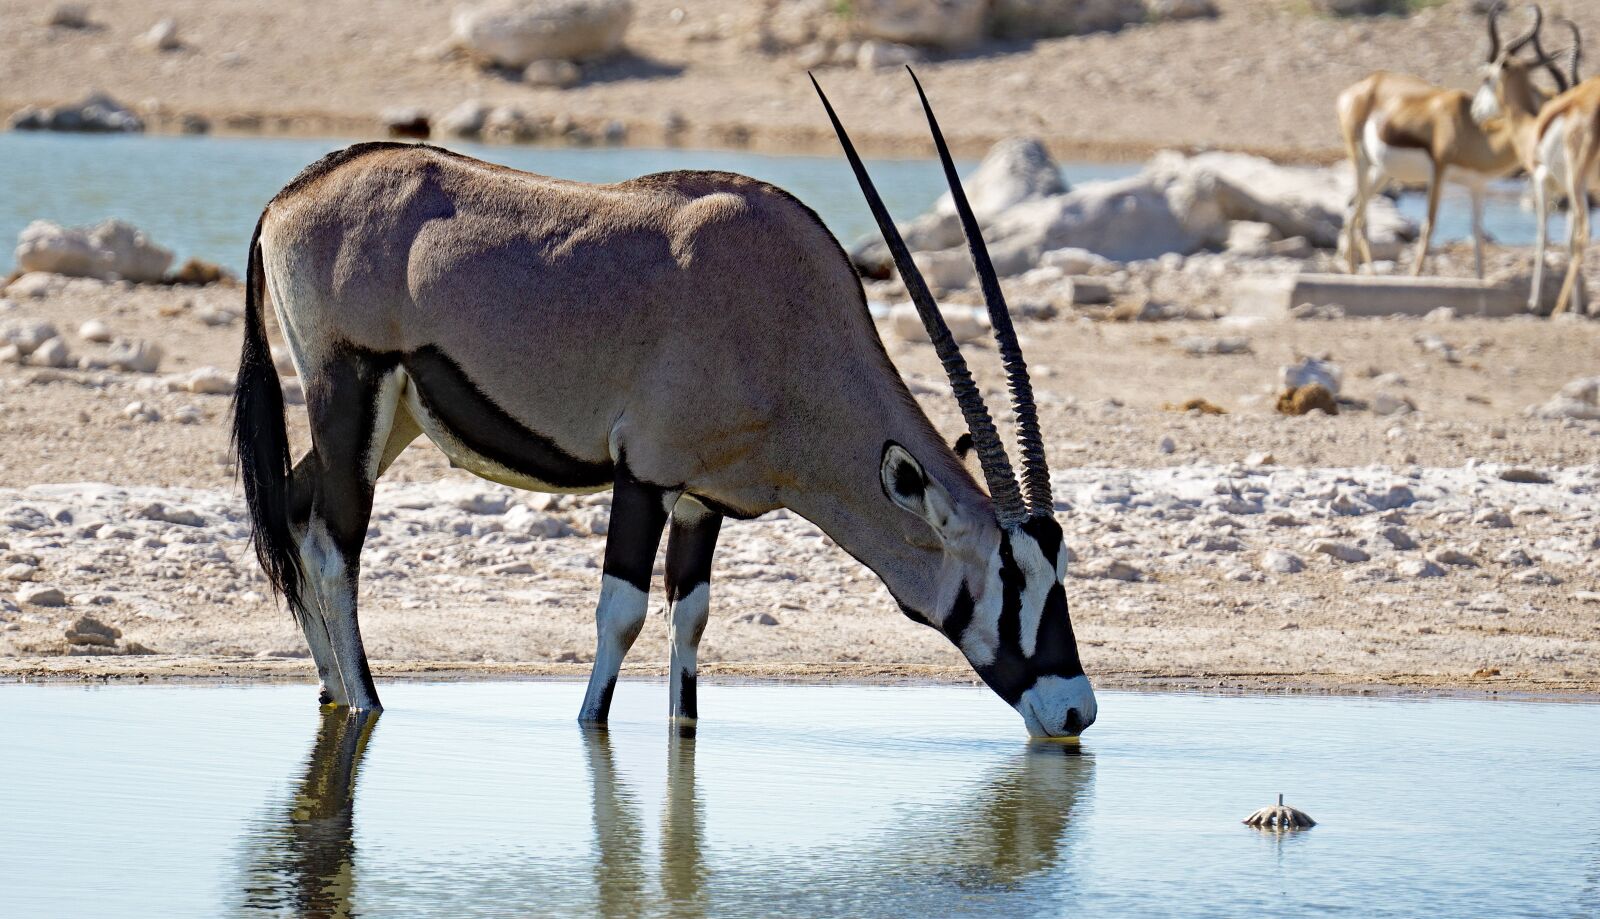 Sony a6000 sample photo. Oryx antilope, water, nature photography